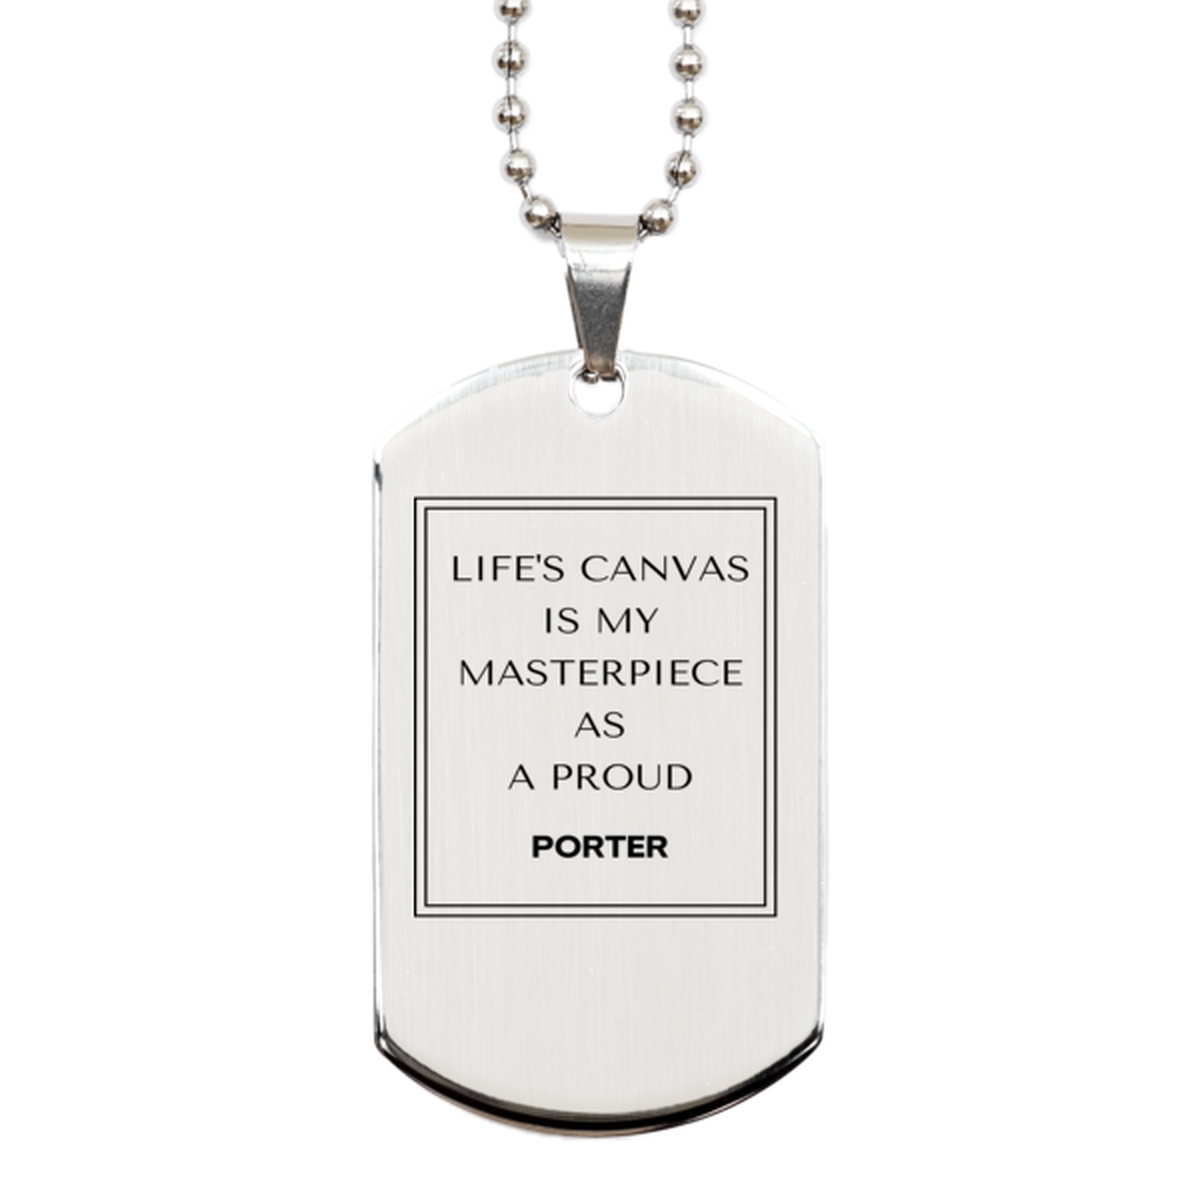 Proud Porter Gifts, Life's canvas is my masterpiece, Epic Birthday Christmas Unique Silver Dog Tag For Porter, Coworkers, Men, Women, Friends